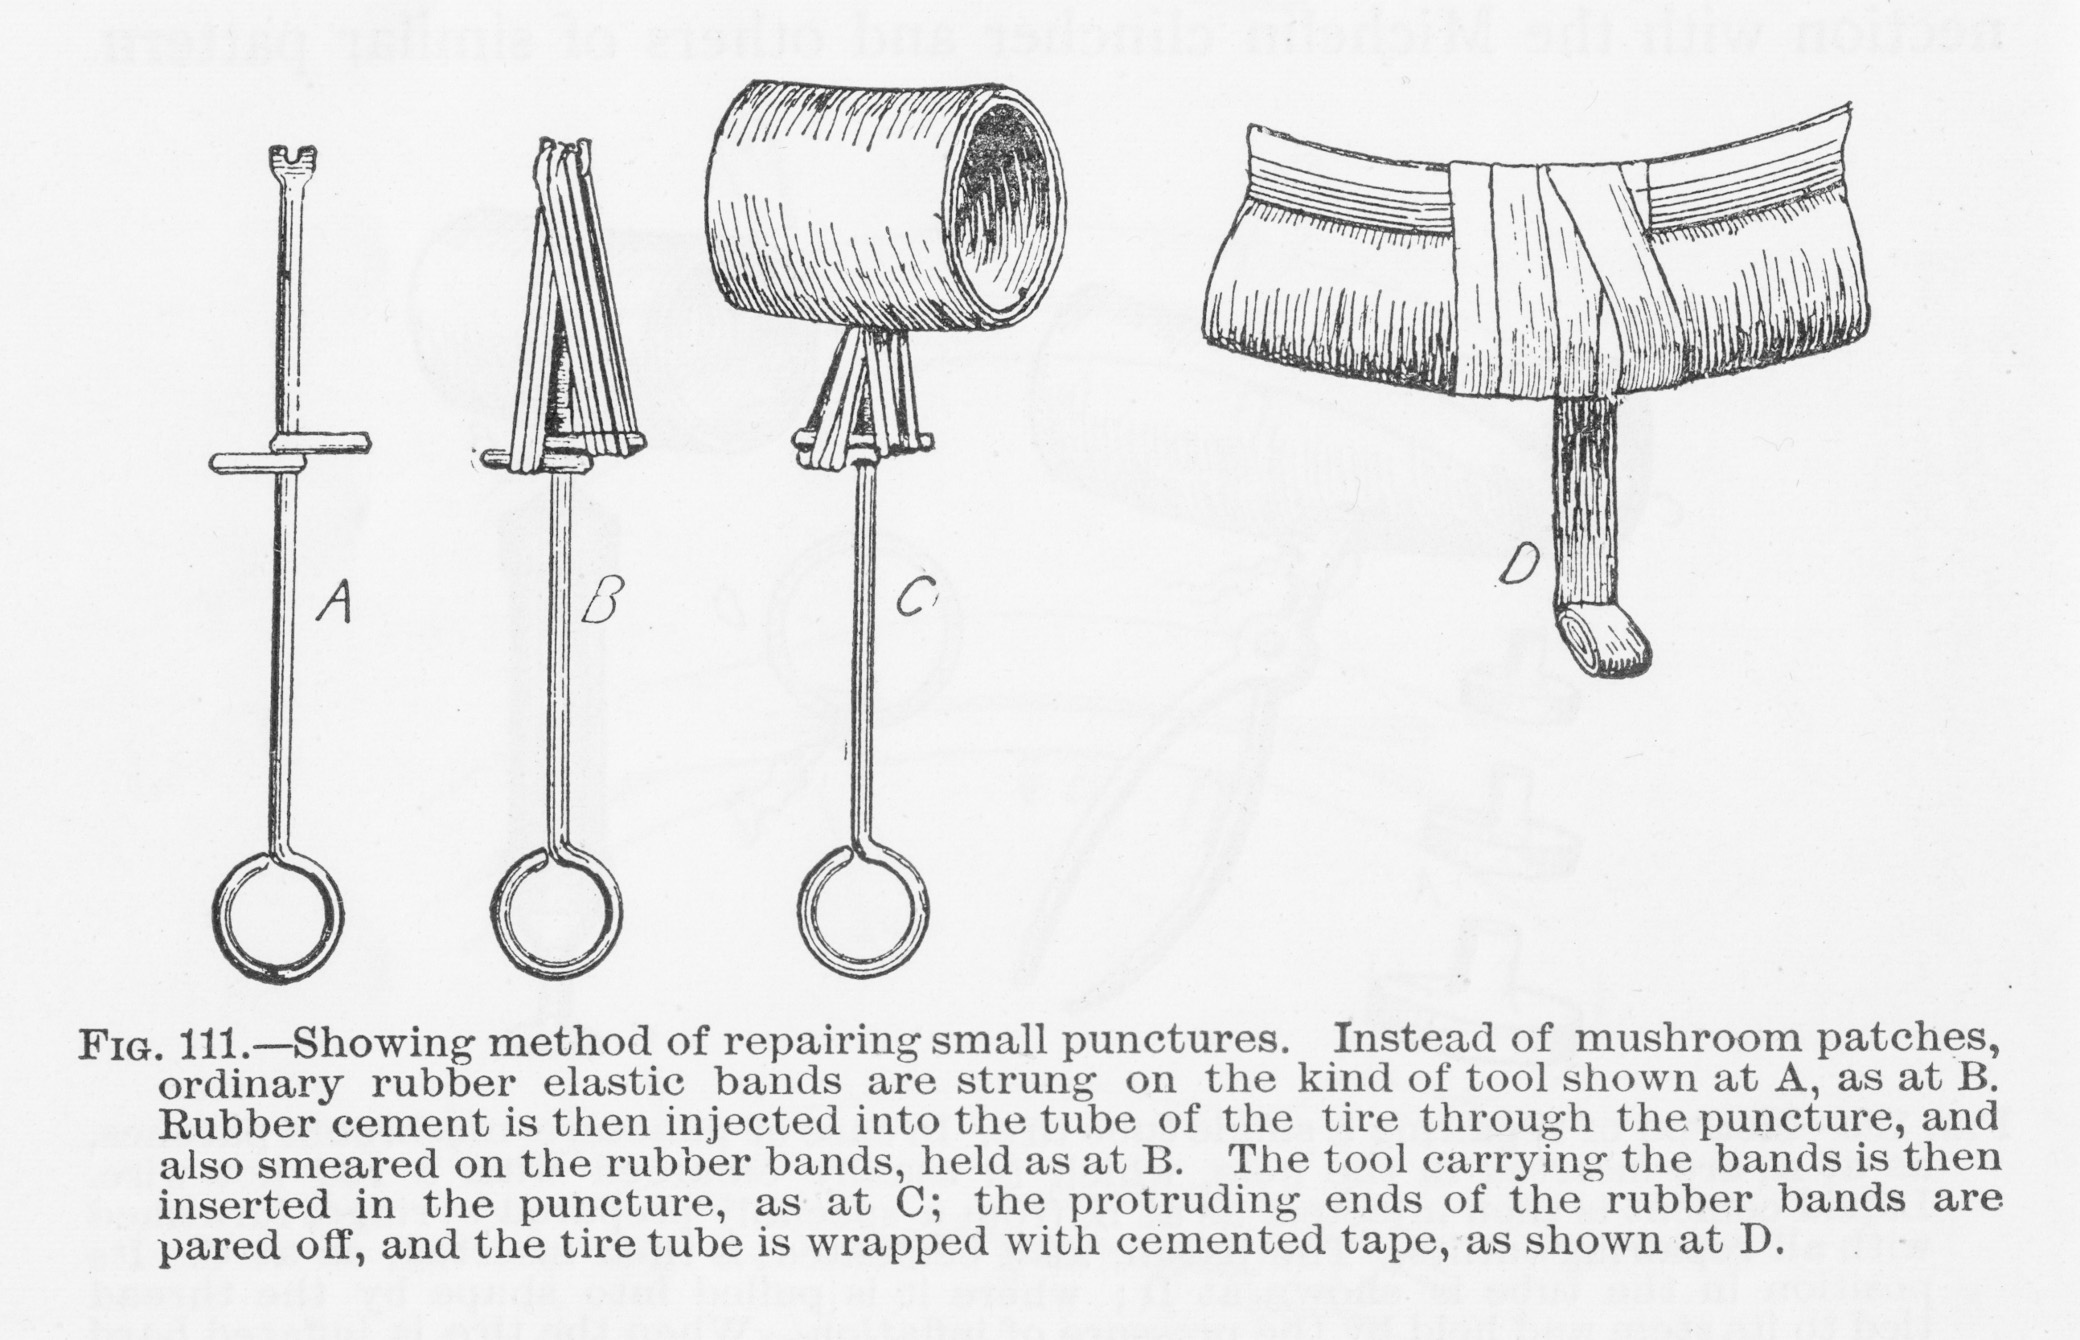 Tire patch method illustrated in Self Propelled Vehicles, 1905, page 130